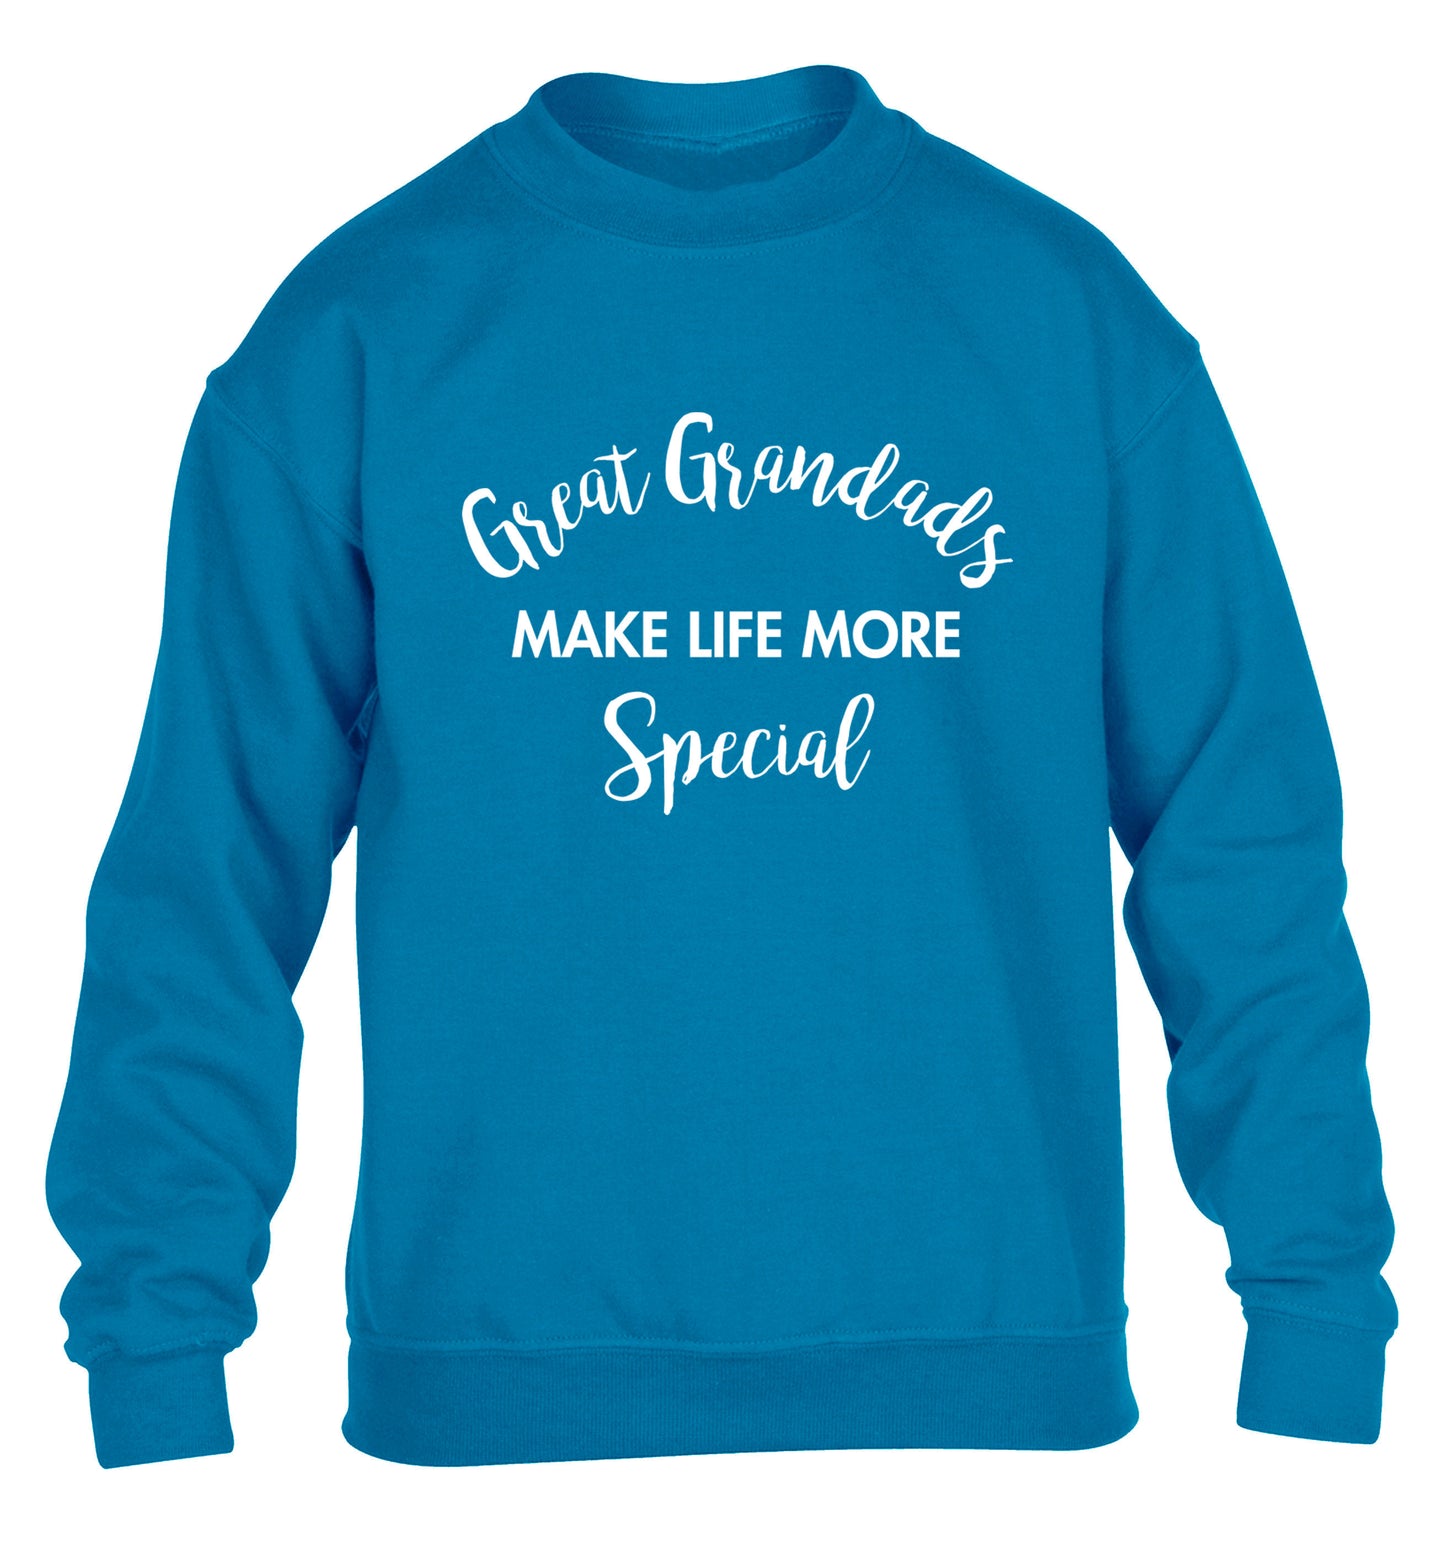 Great Grandads make life more special children's blue sweater 12-14 Years